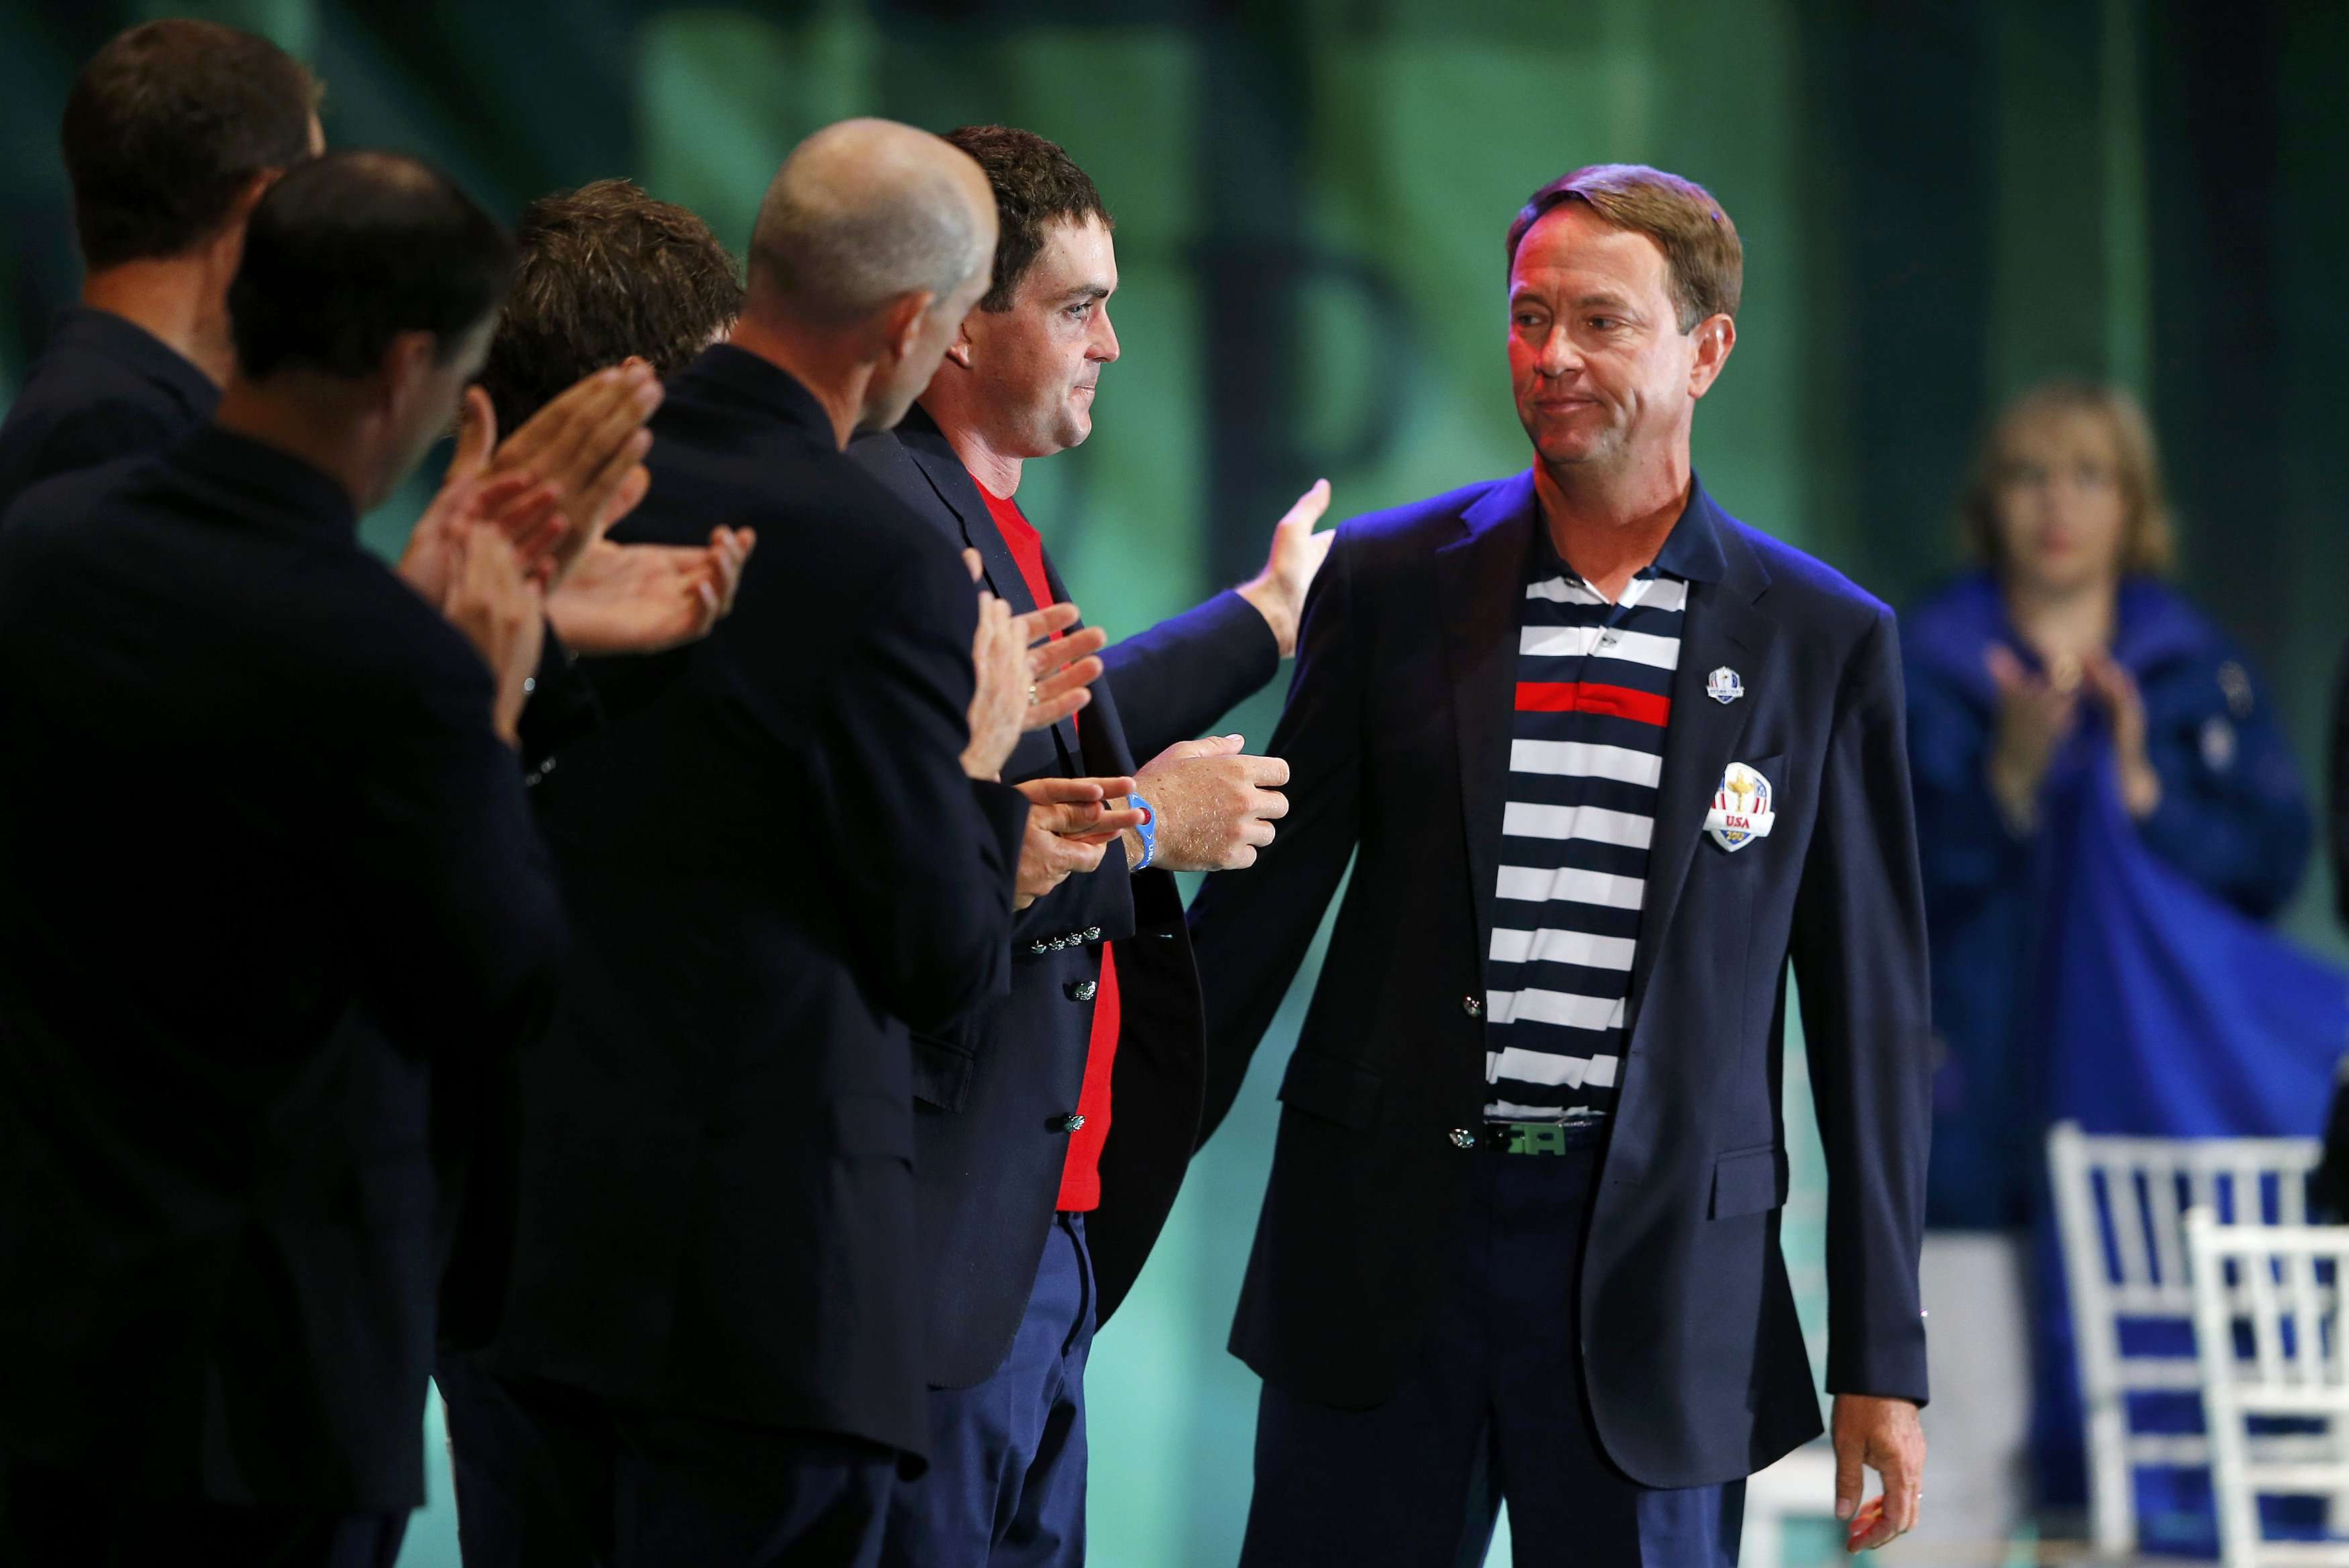 Team US captain Davis Love III was also captain in 2012 when his team lost out to Europe in what has come to be known as ‘The Miracle of Medinah’. Photo: Reuters